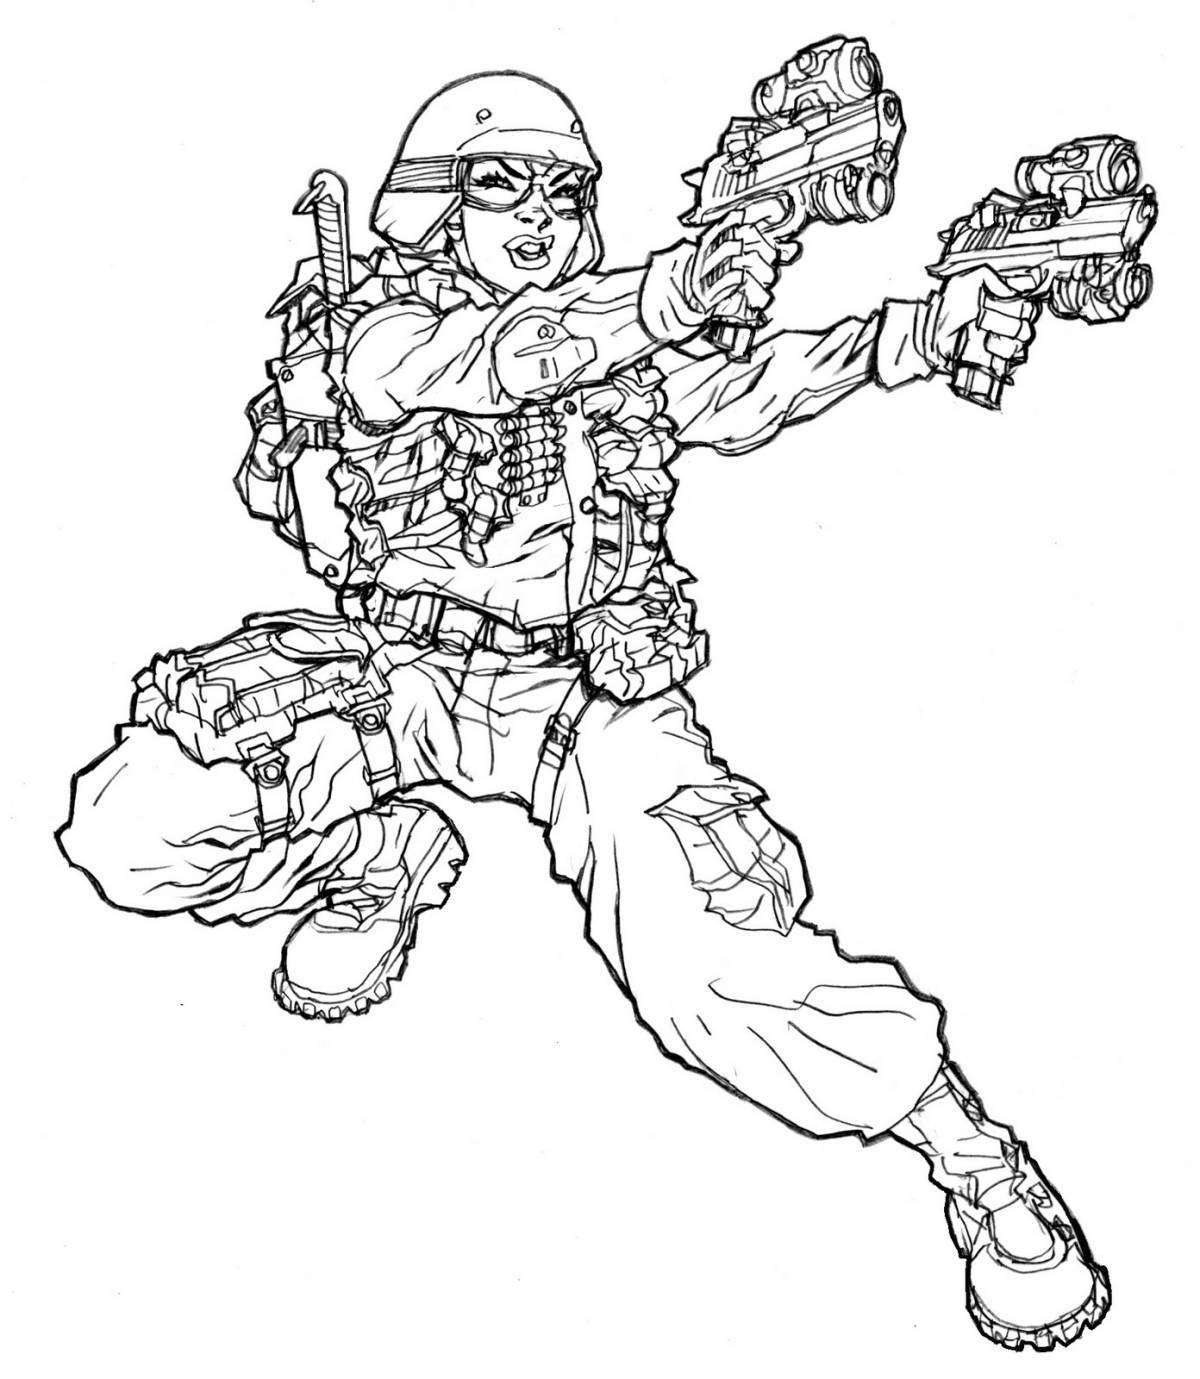 Valiant coloring pages of military soldiers